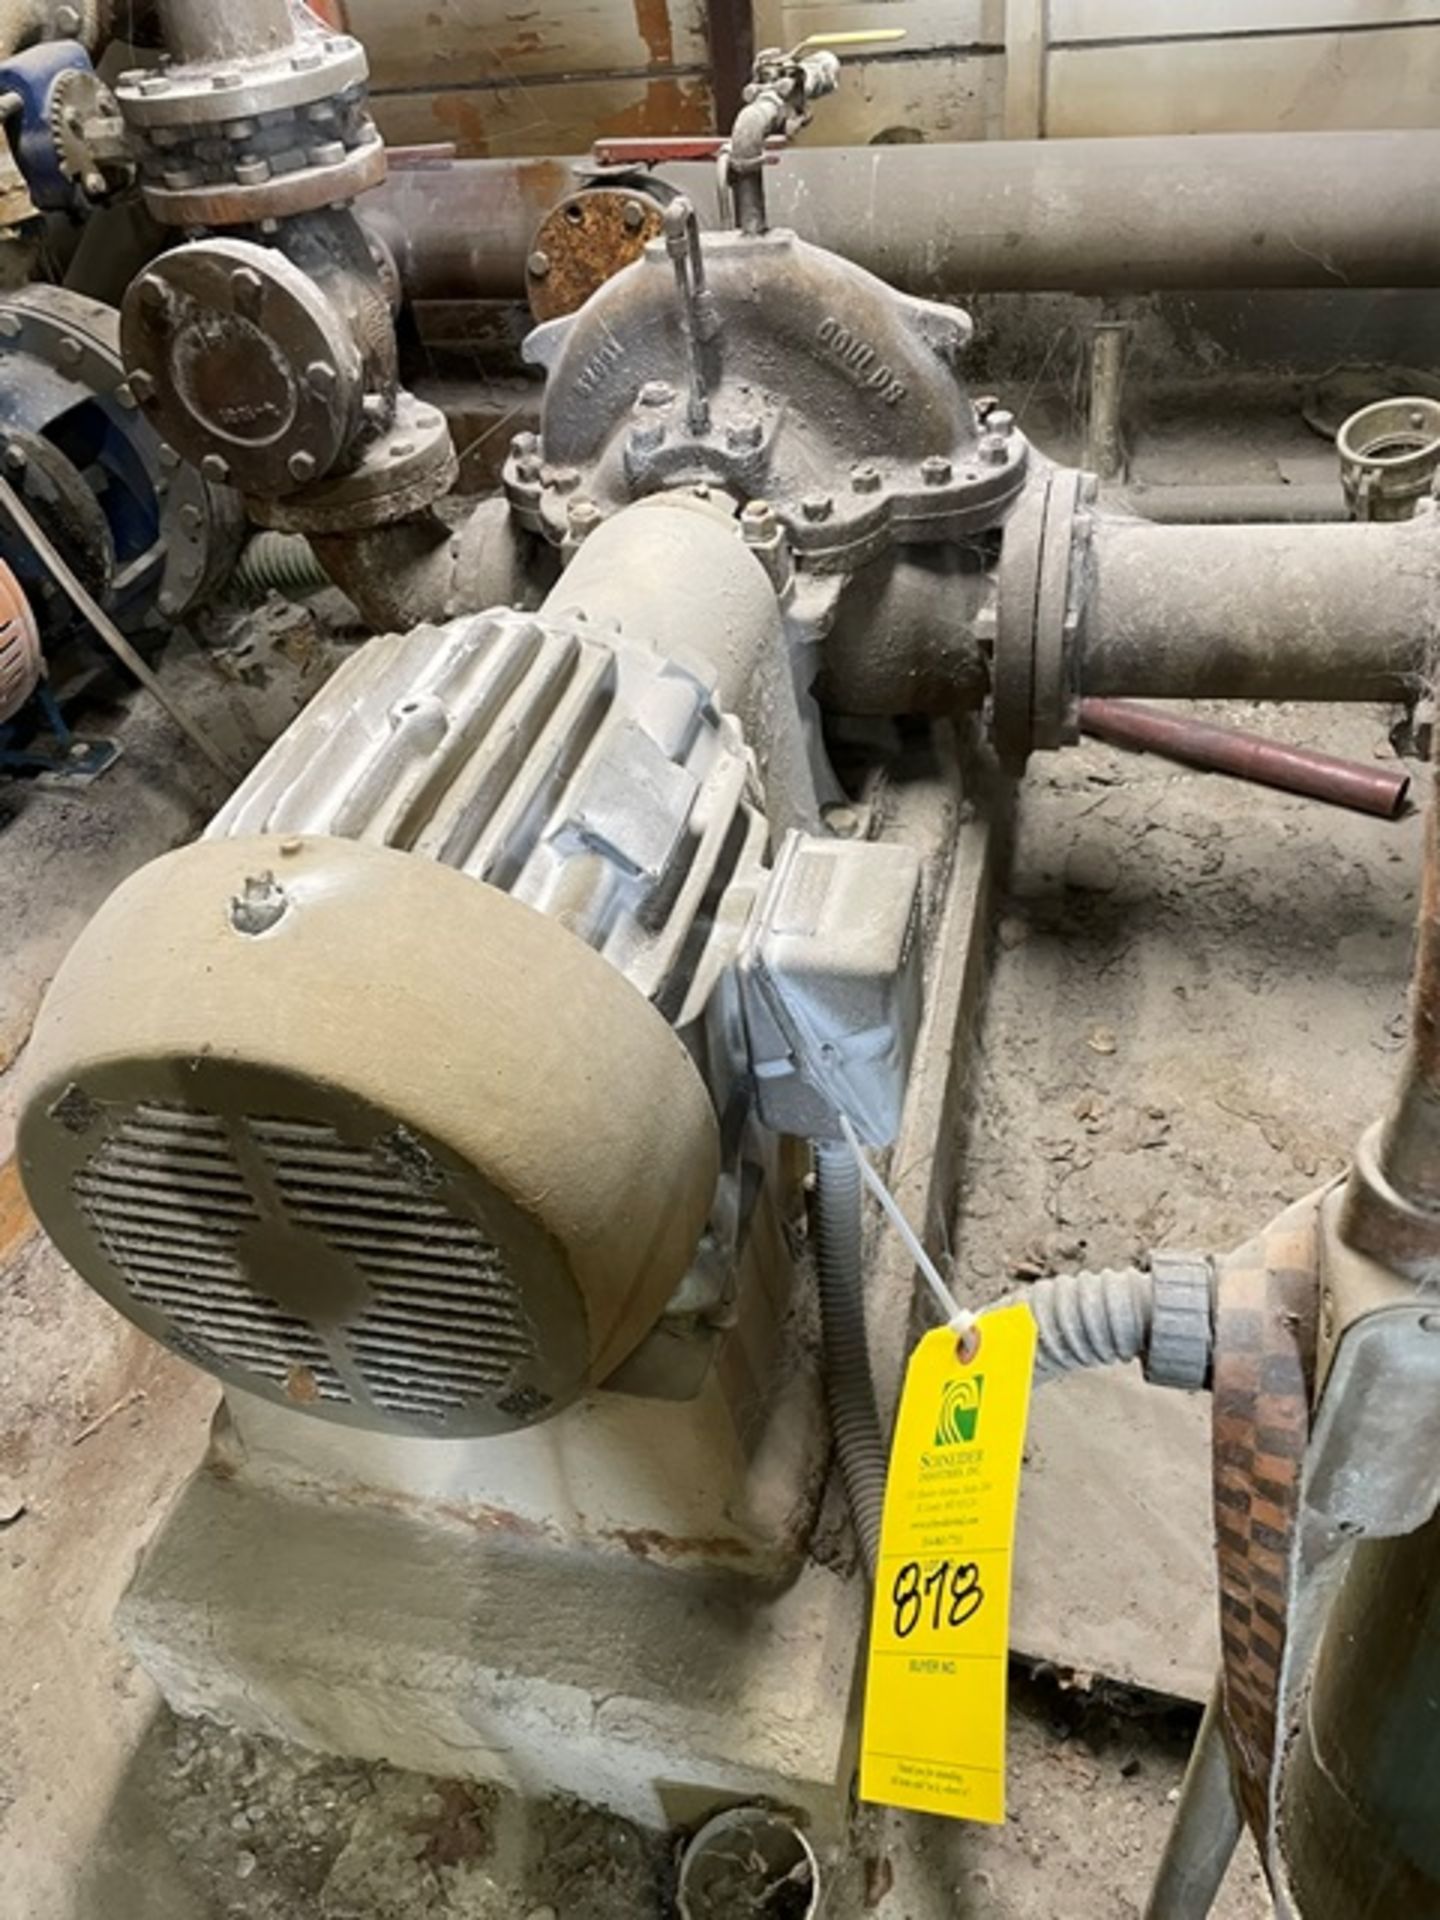 Reliance 25 HP Motor & Goulds Pump., Rigging & Loading Fee: $300 - Image 2 of 2